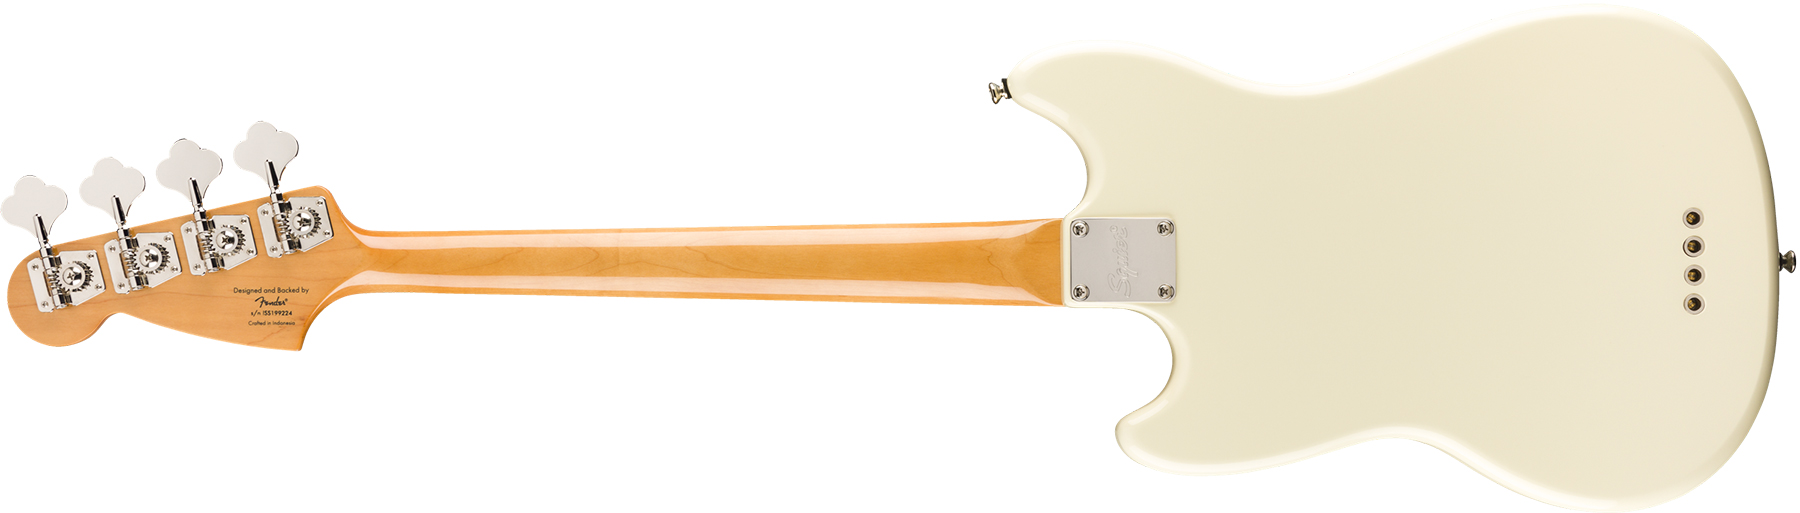 Squier Mustang Bass '60s Classic Vibe Lau 2019 - Olympic White - Basse Électrique Solid Body - Variation 1